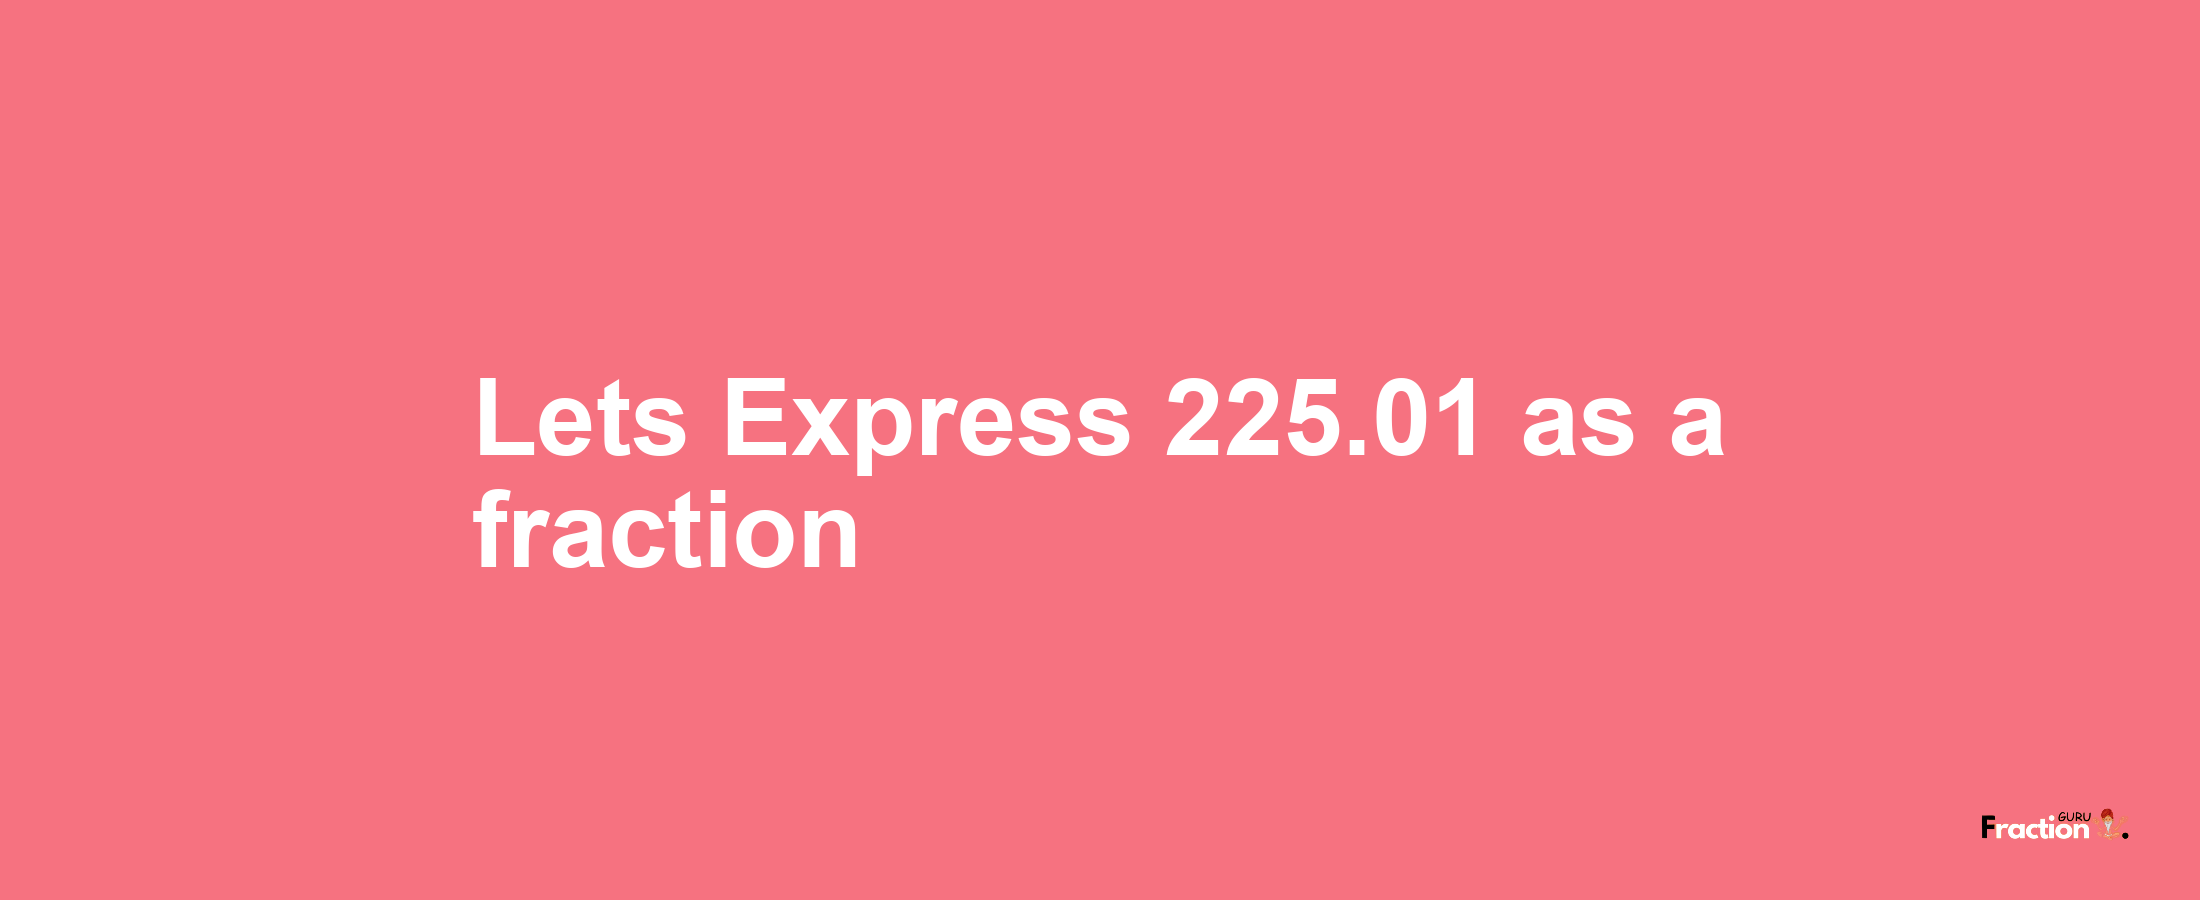 Lets Express 225.01 as afraction